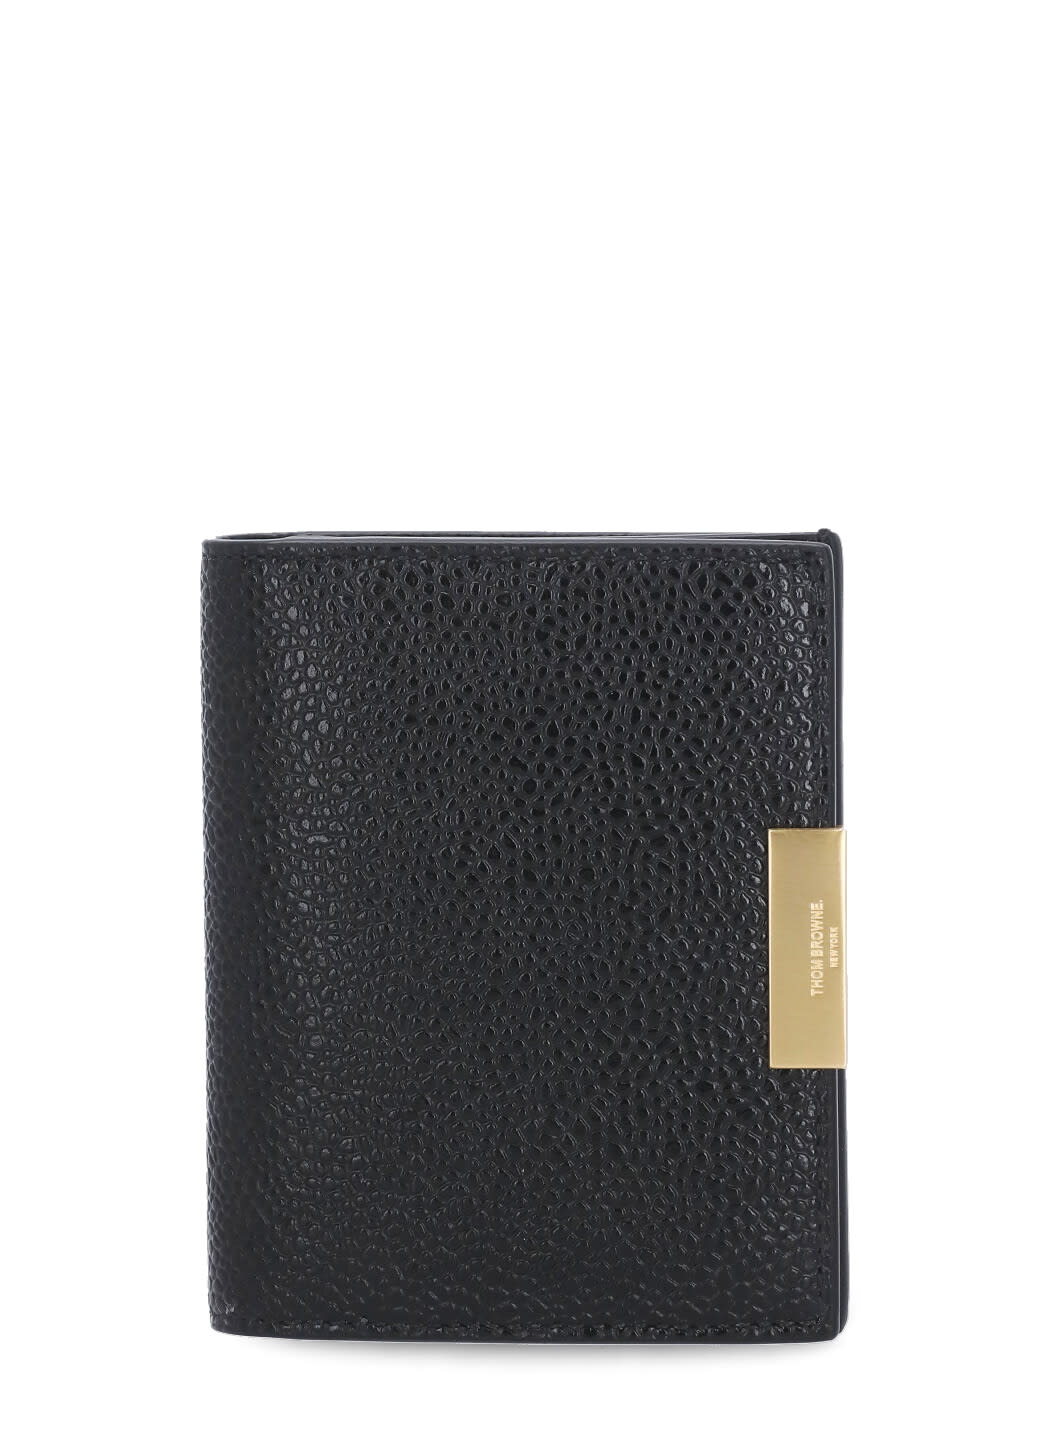 Thom Browne Leather Double Card Holder